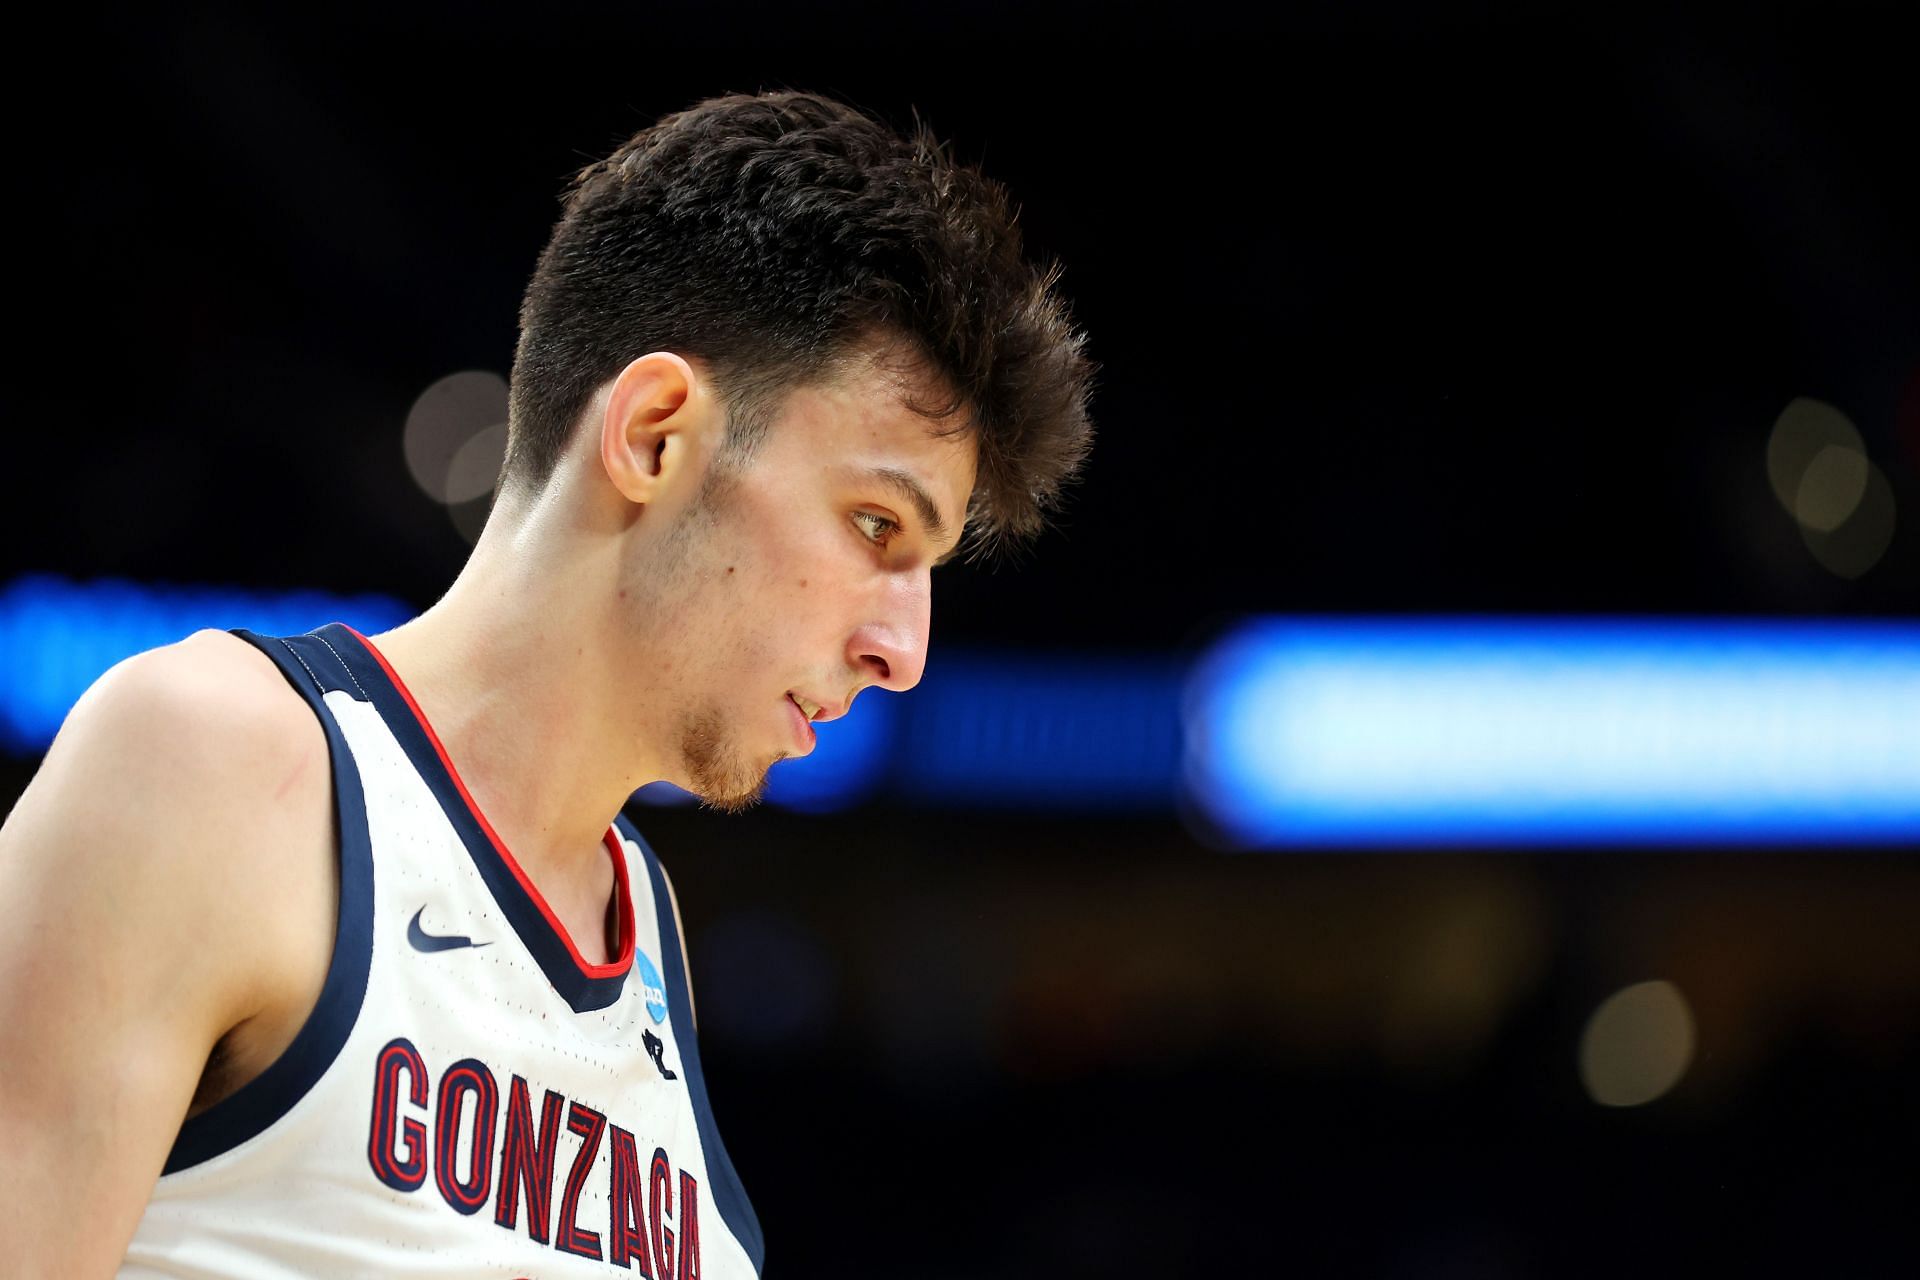 Gonzaga center Chet Holmgren could be the pick at No. 2 for the OKC Thunder